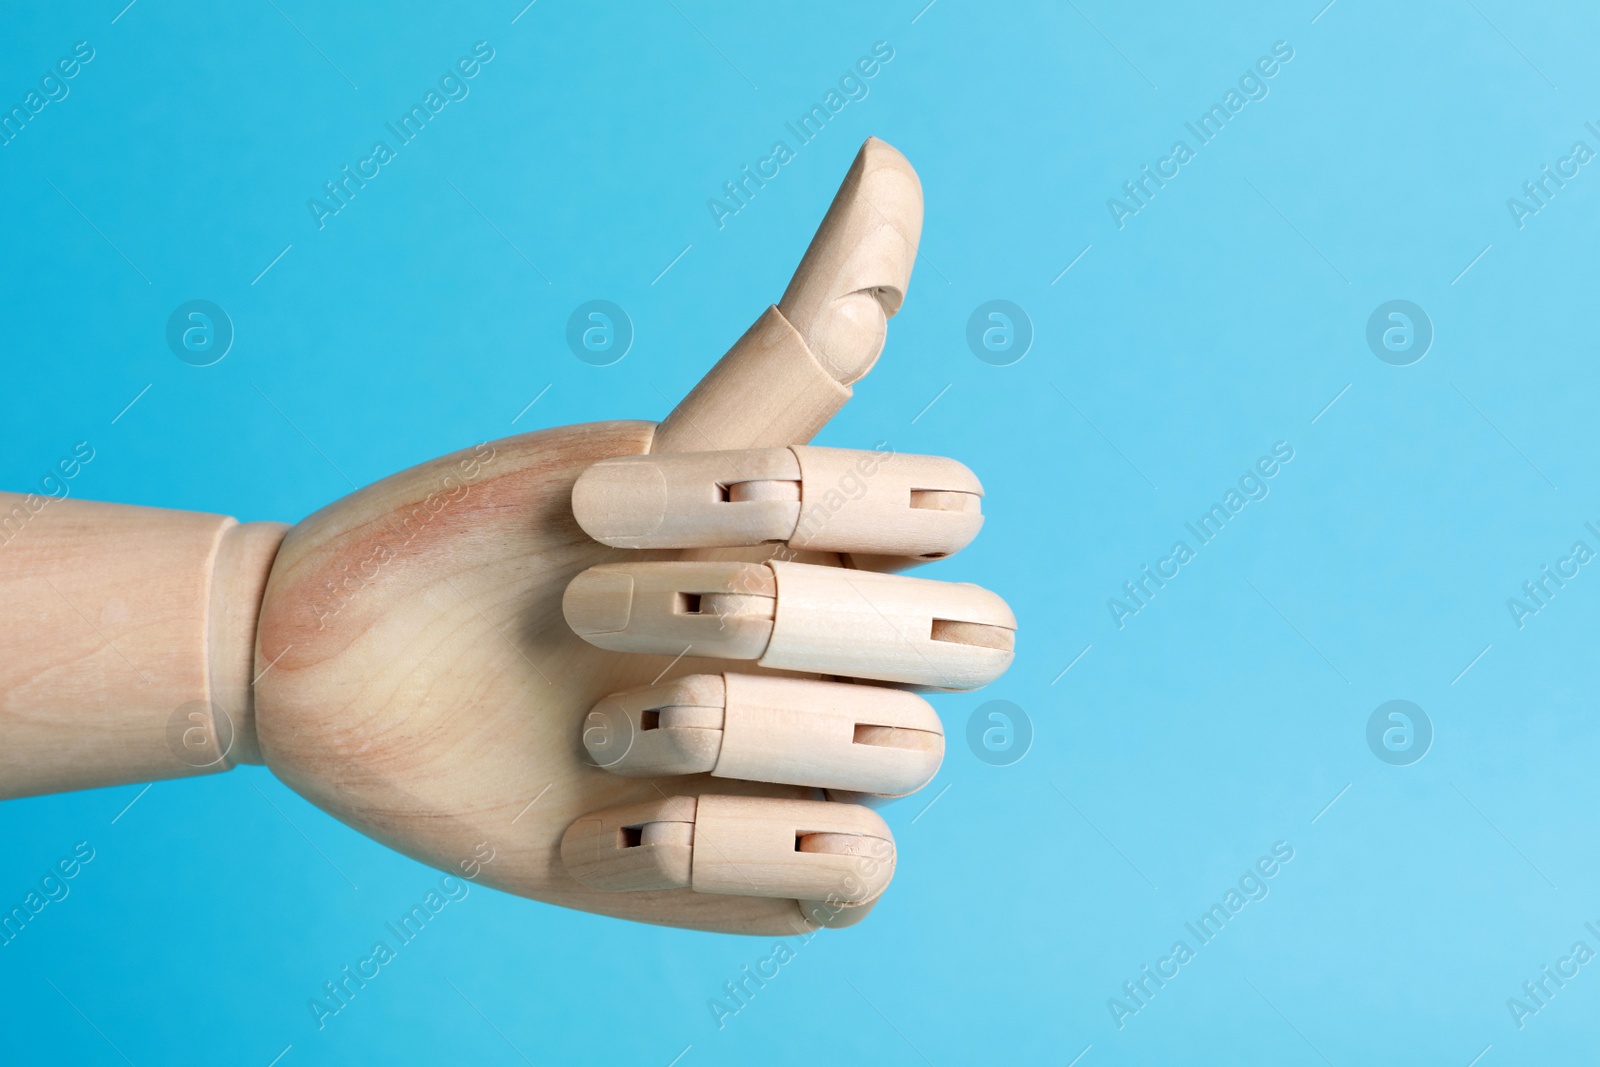 Photo of Wooden mannequin hand showing thumb up on light blue background. Space for text